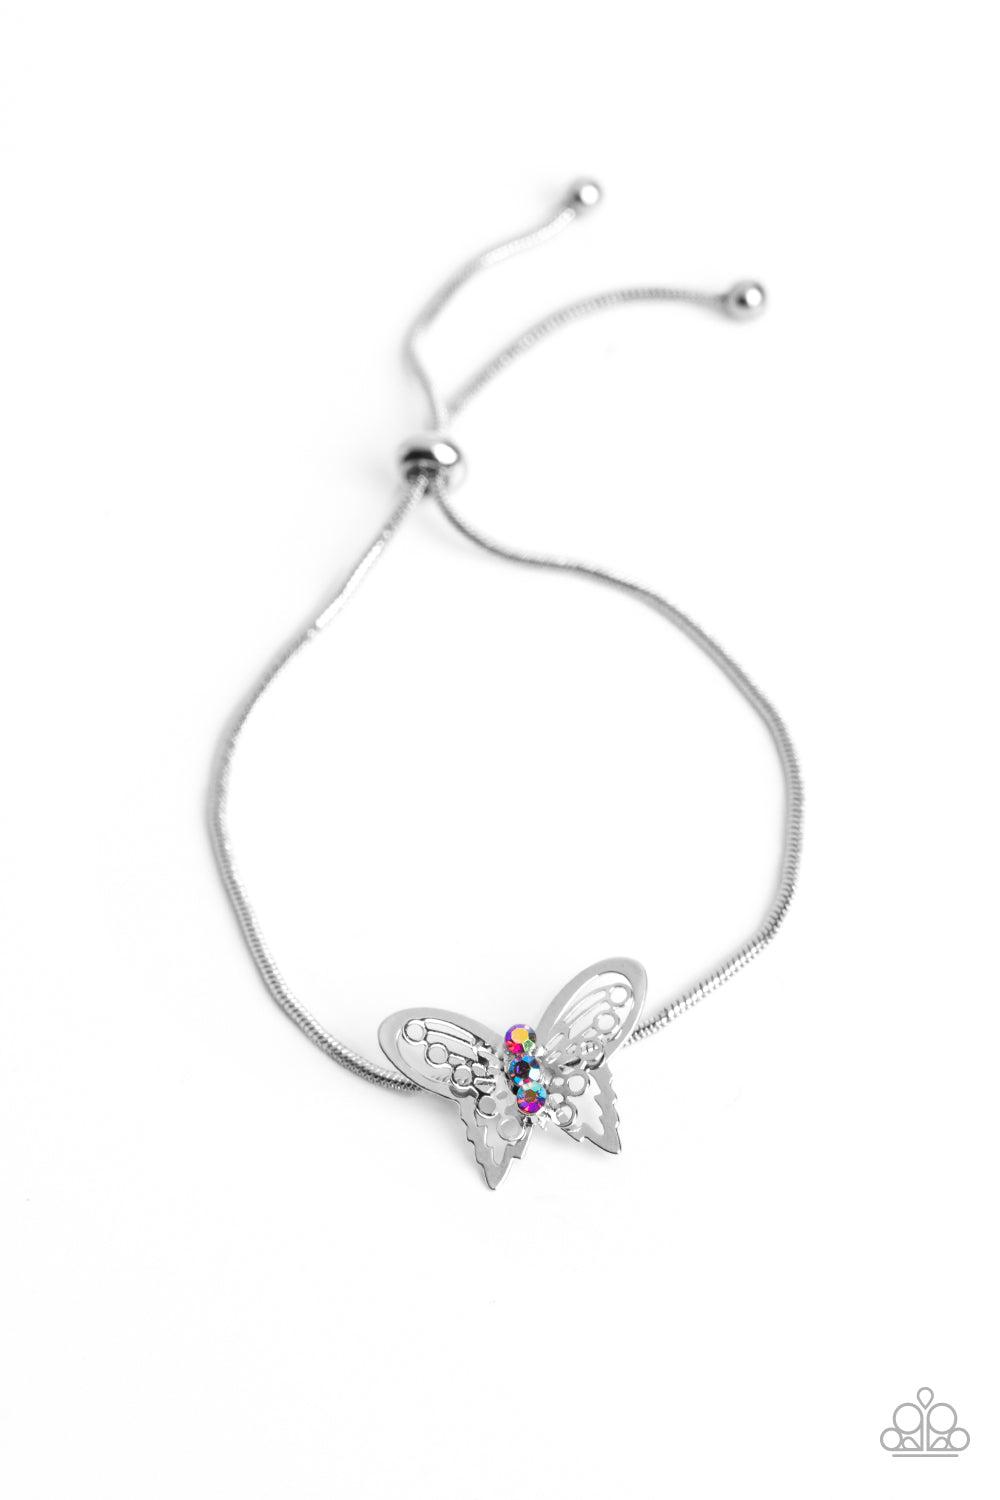 Wings of Wonder Pink Butterfly Bracelet - Paparazzi Accessories- lightbox - CarasShop.com - $5 Jewelry by Cara Jewels